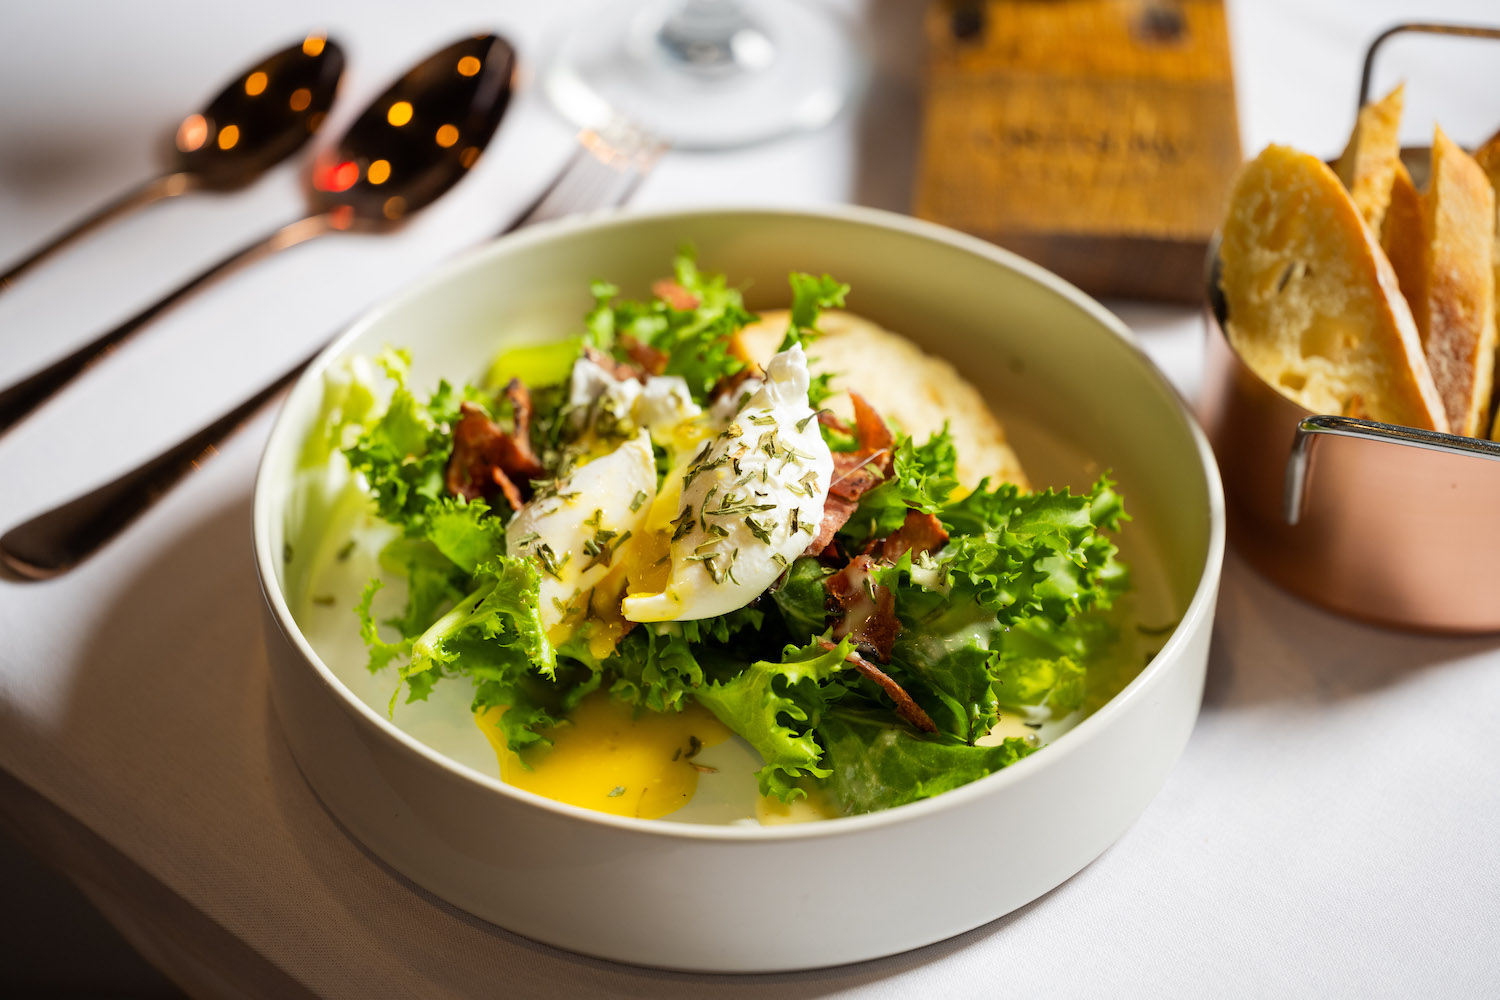 the salad Lyonnaise with poached egg